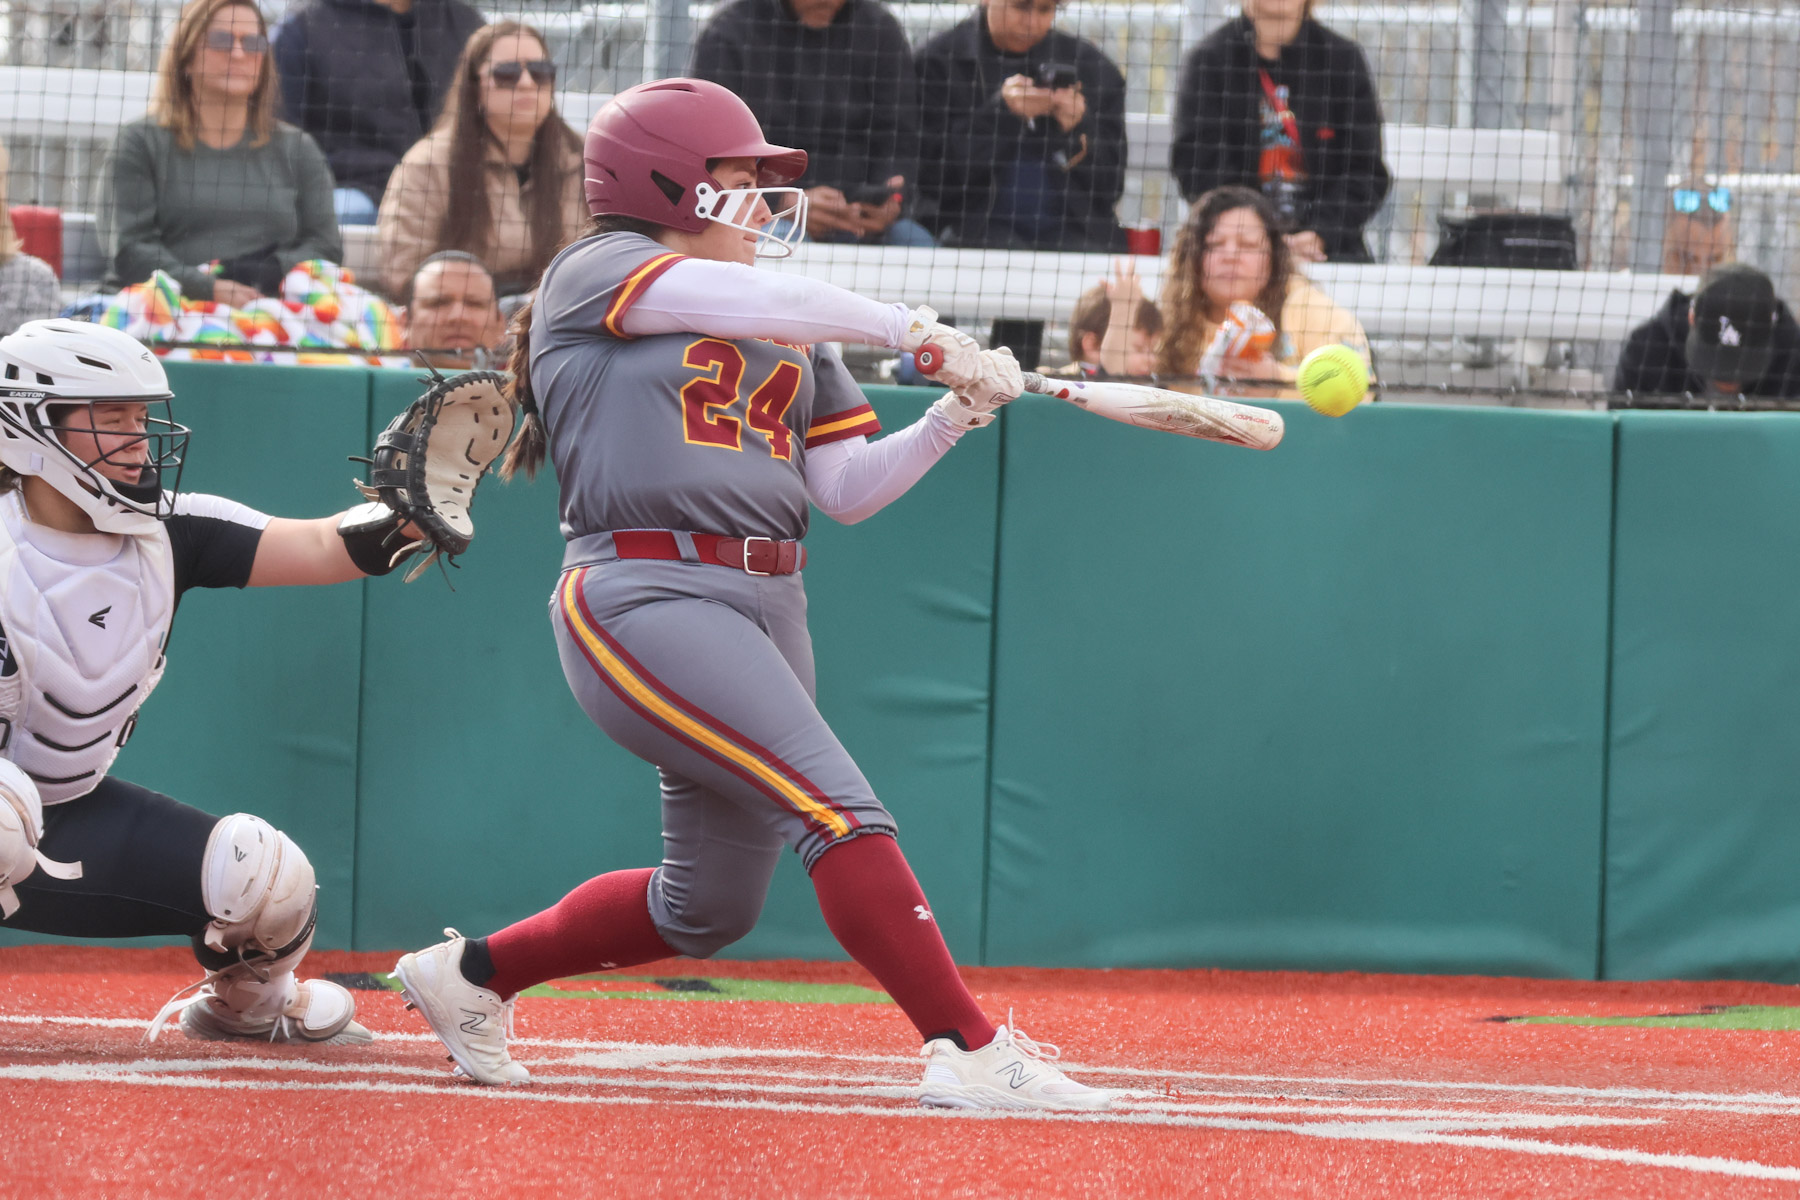 Adriana Valdez with hit here in the PCC softball team's season opener on Saturday (photo by Richard Quinton).